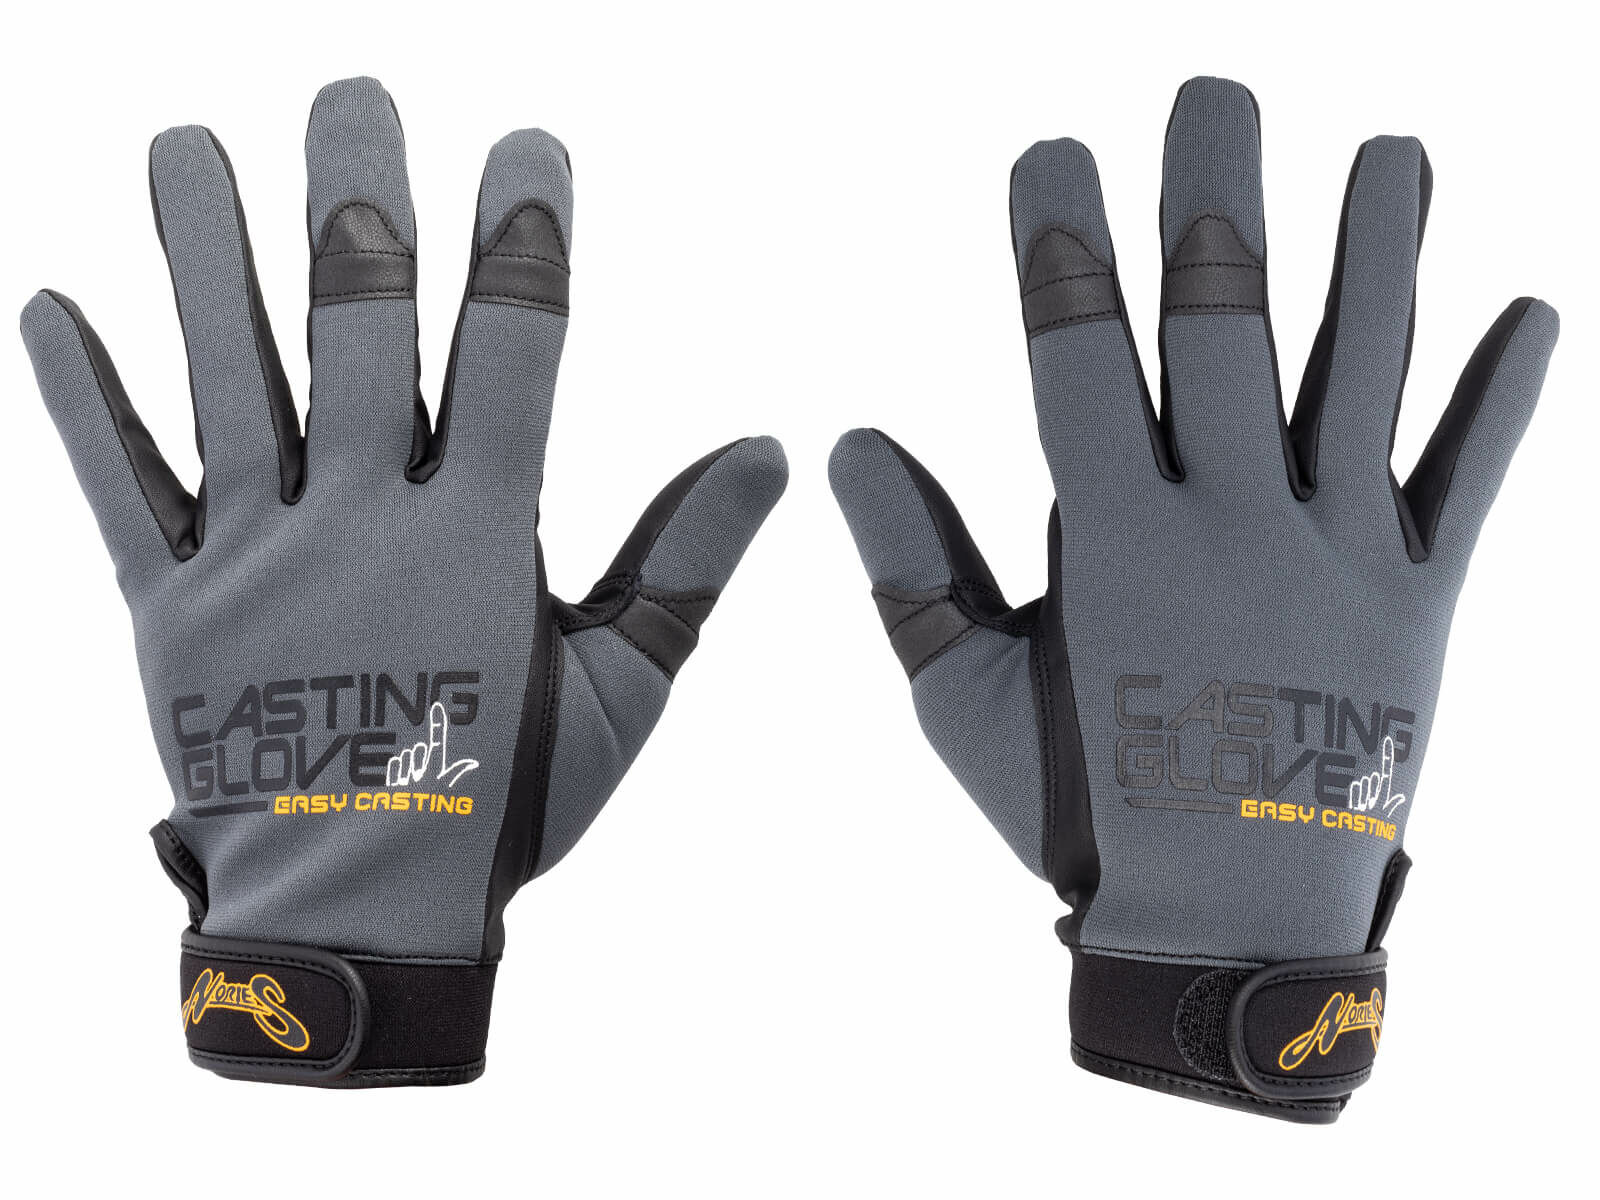 NORIES Casting Gloves NS-03 Gray Gr. L